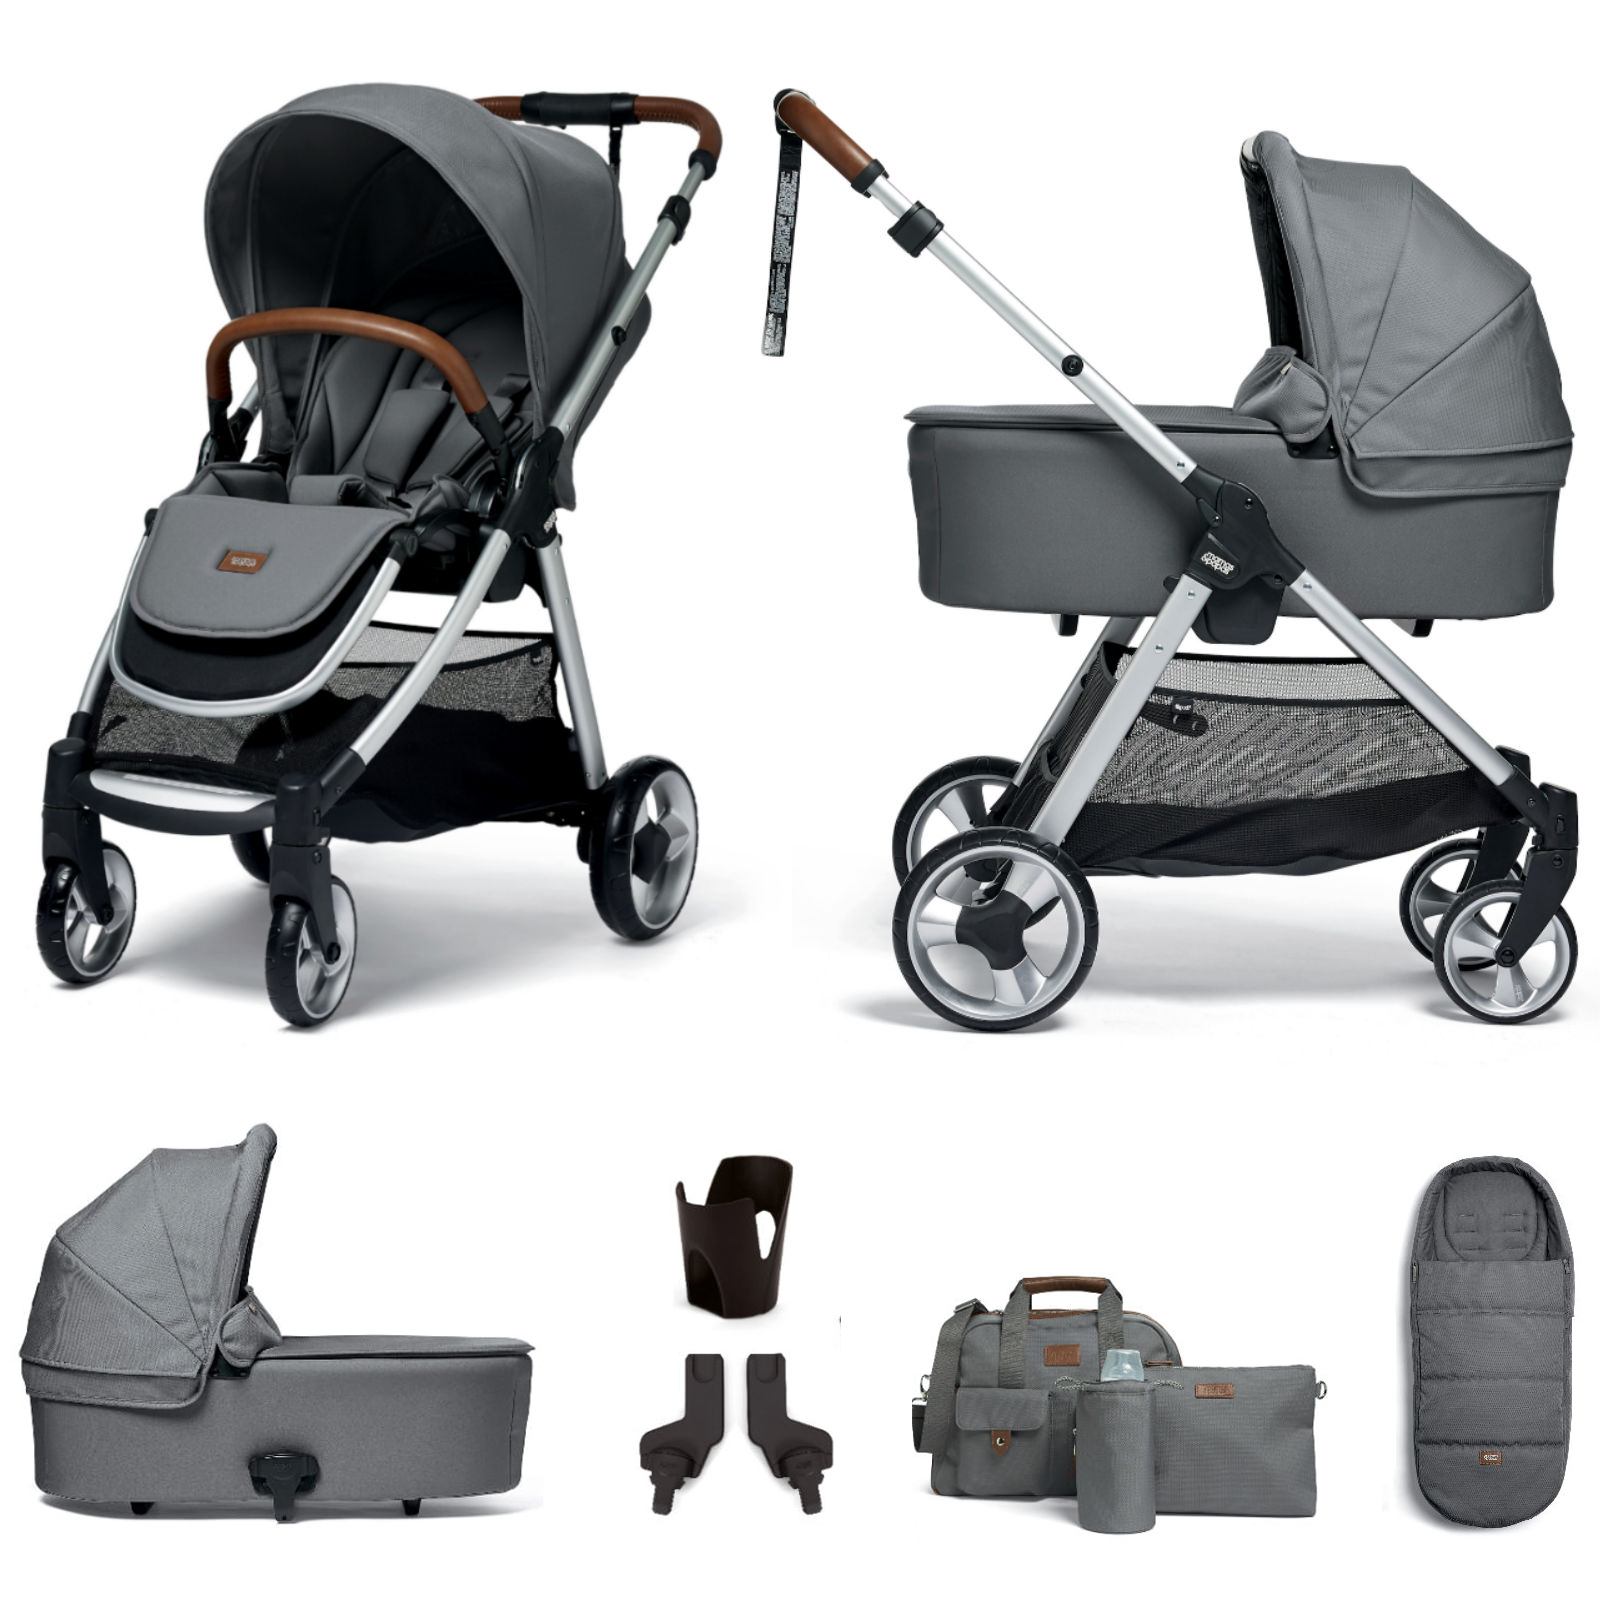 Mamas & Papas Flip XT2 (6pc) 2in1 Pushchair Stroller with Carrycot - Fossil Grey